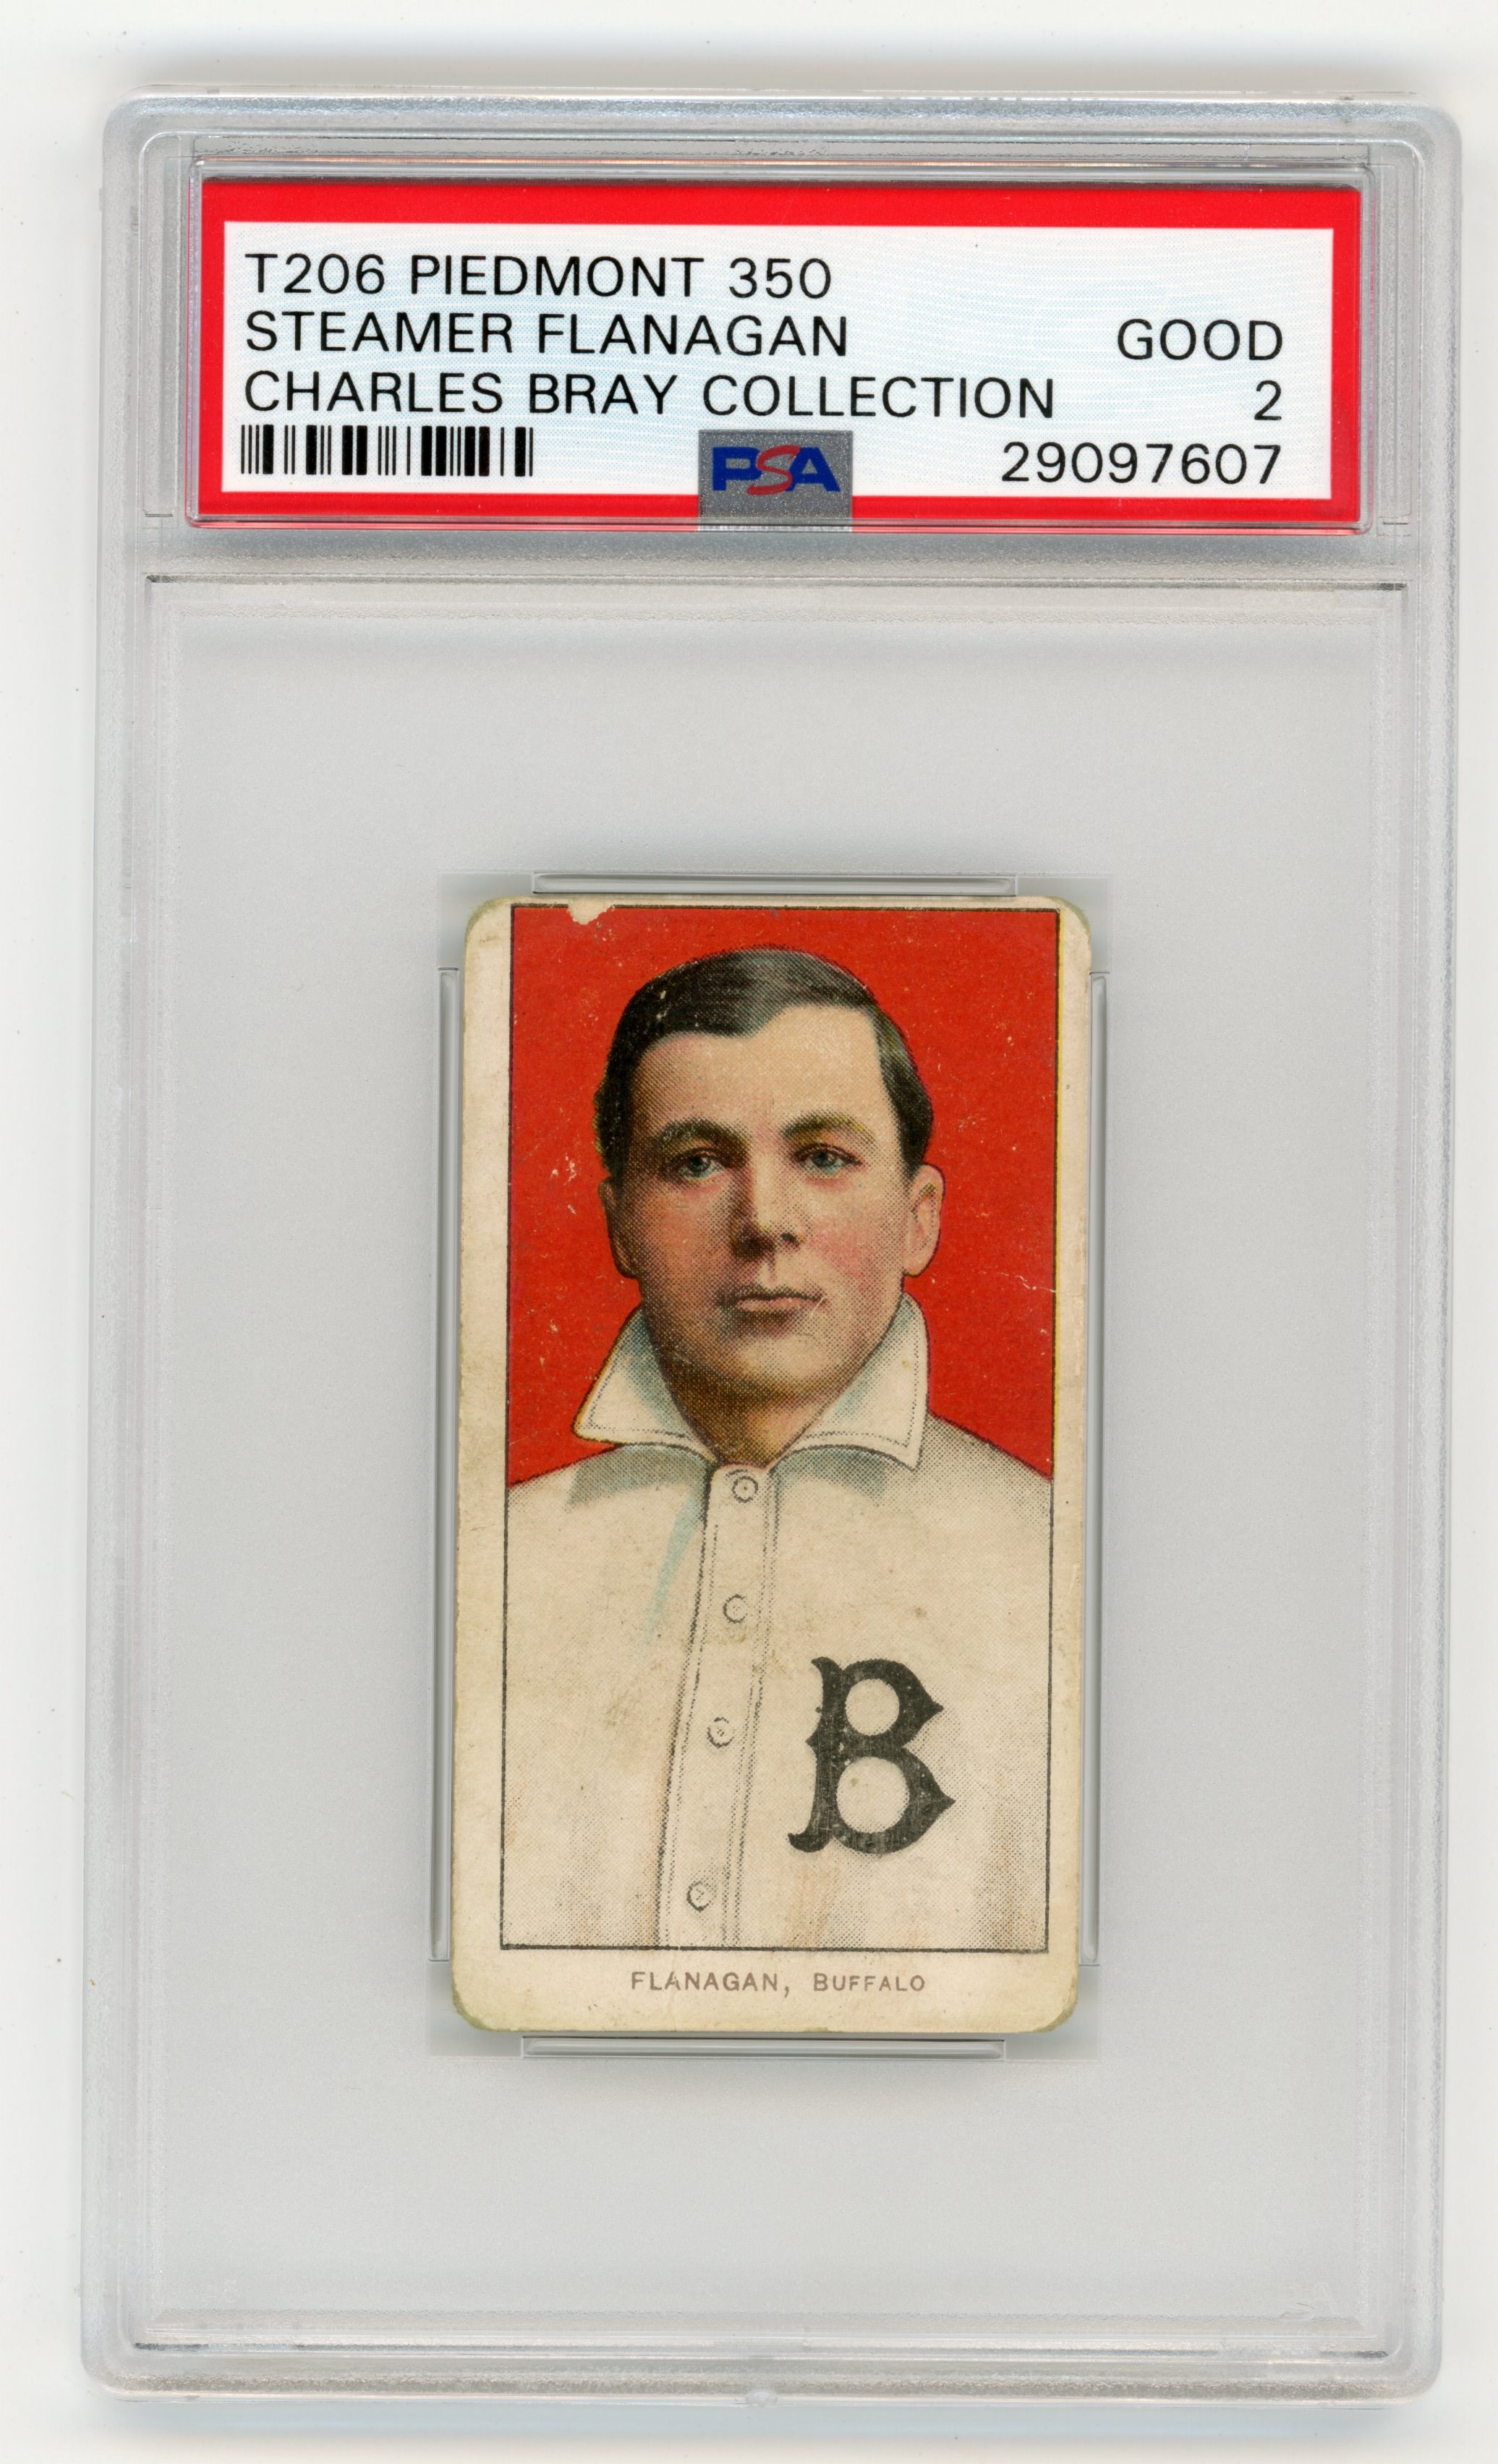 Baseball and Trading Cards - T206 Piedmont 350 Steamer Flanagan PSA GOOD 2 From the Charles Bray Collection.